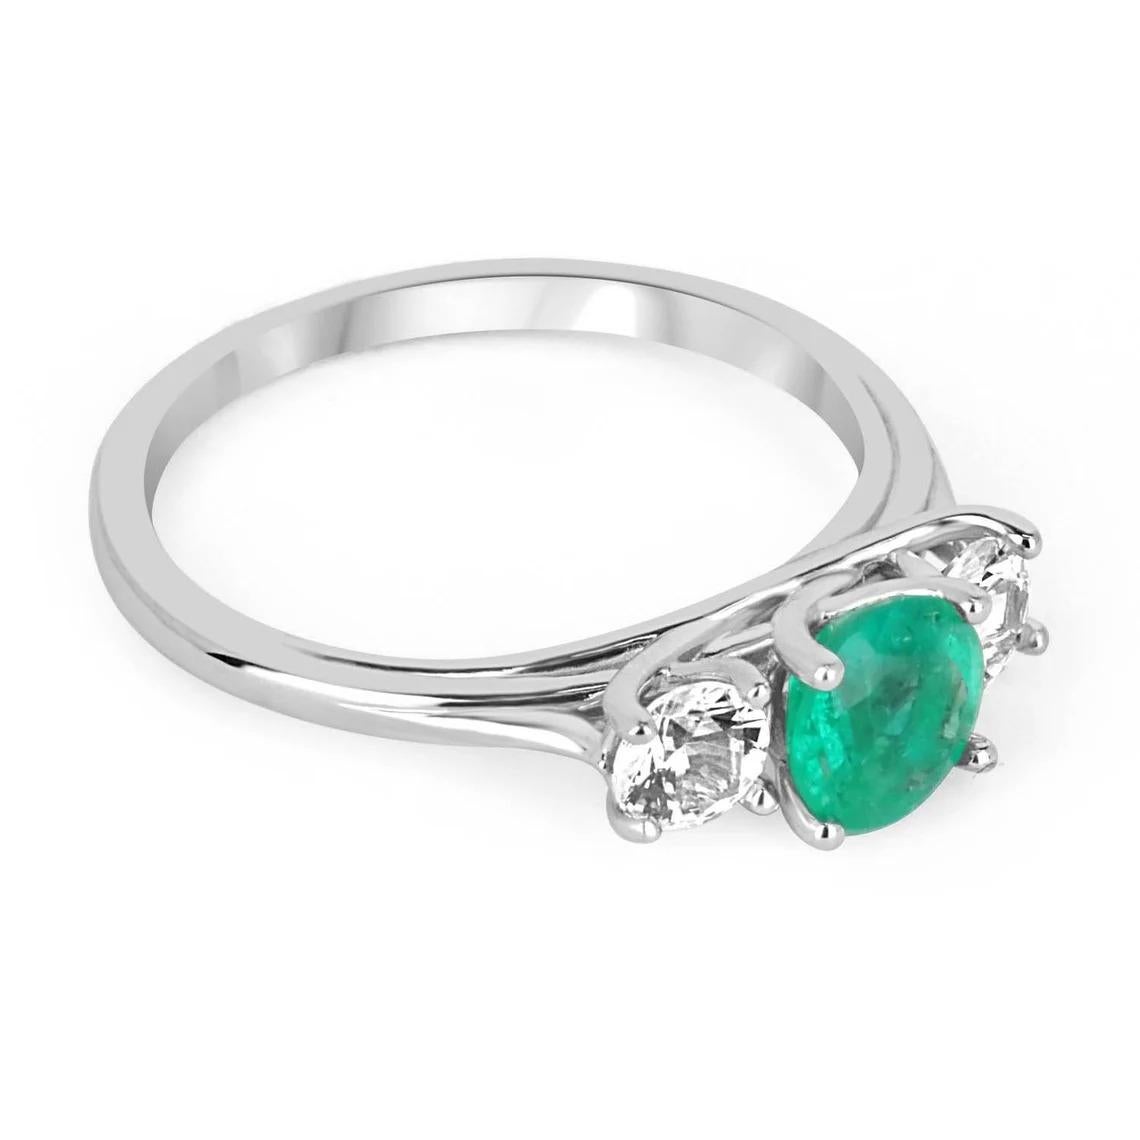 A classic, 14k solid gold natural emerald & diamond three stone engagement ring. A timeless engagement ring featuring a genuine round emerald flanked by two brilliant round diamonds. The Colombian emerald has very good qualities as it is mined from